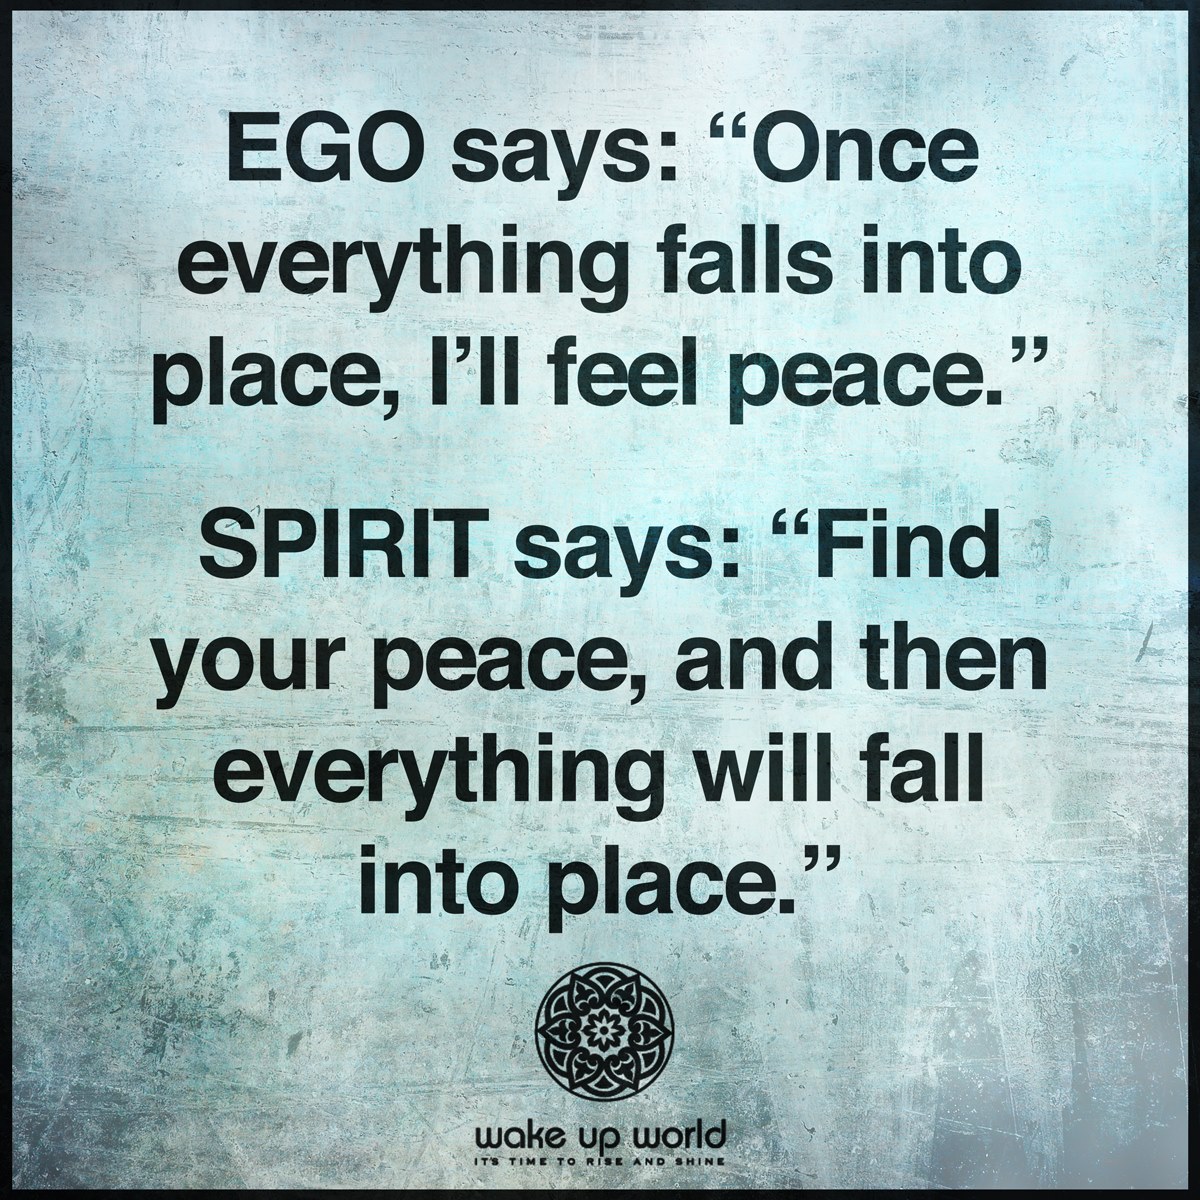 Ego says once everything falls into place Ill feel peace